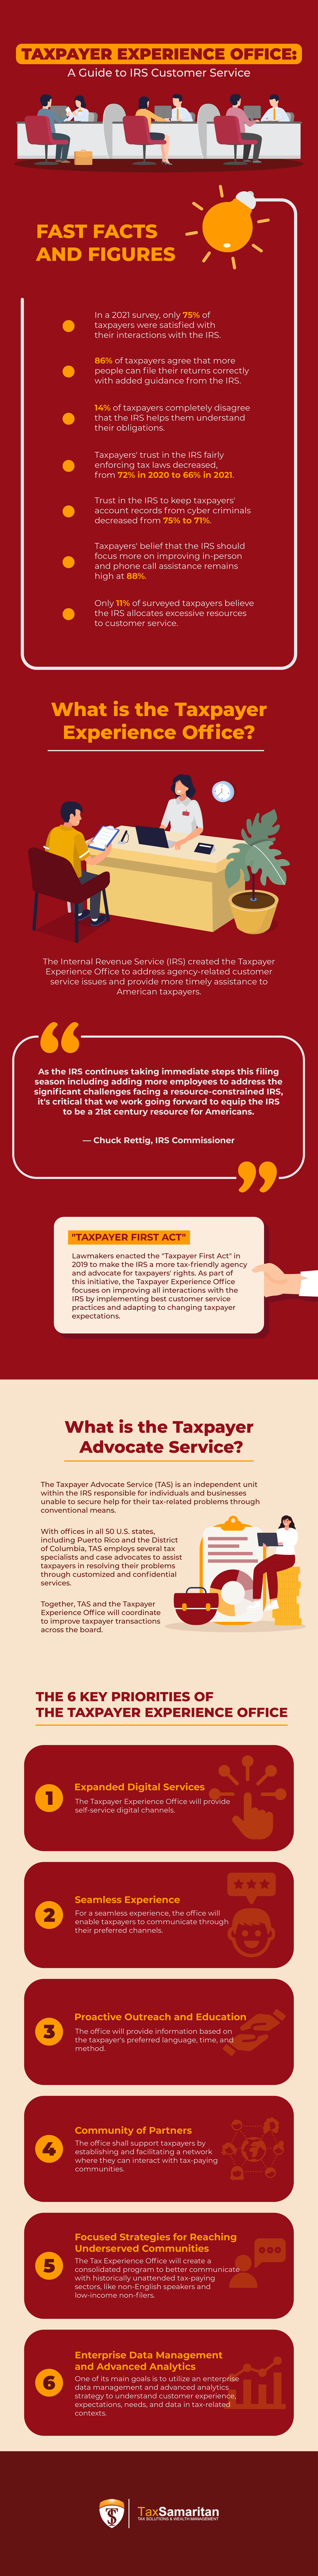 Infographic version of the article "Taxpayer Experience Office: A Guide to the IRS Customer Service"